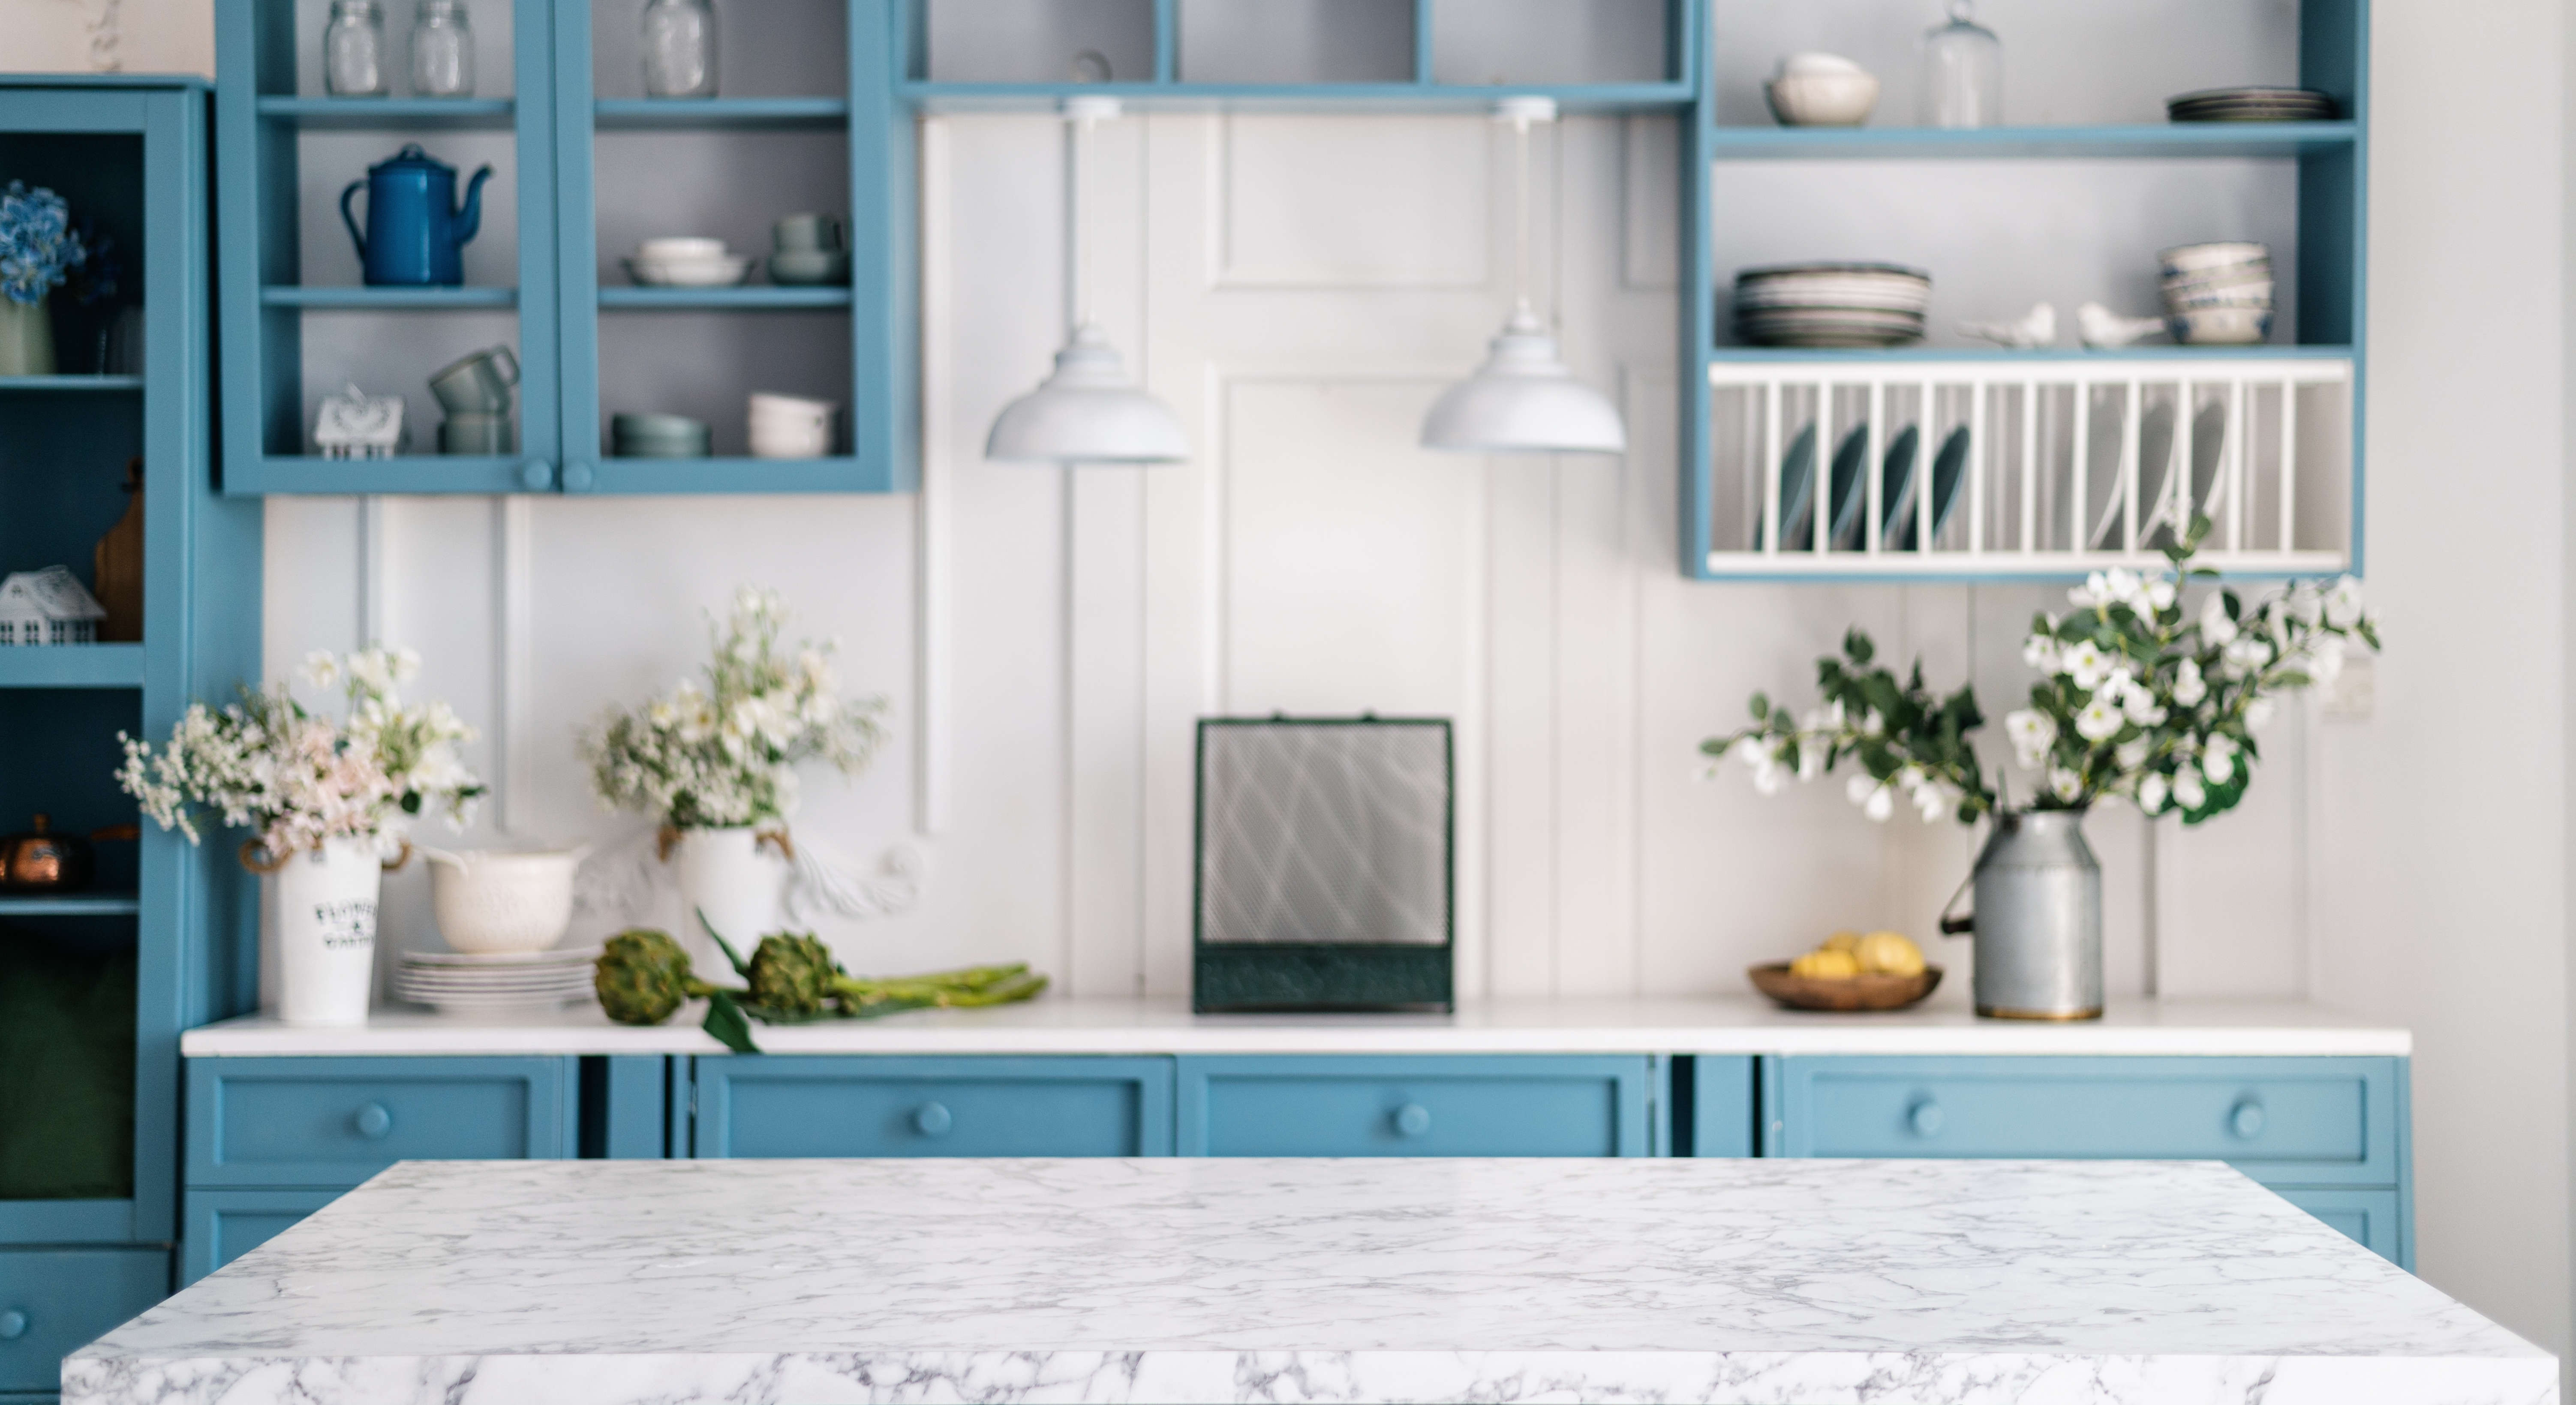 5 ways to upgrade your kitchen cabinets without buying new ones | Tom's ...